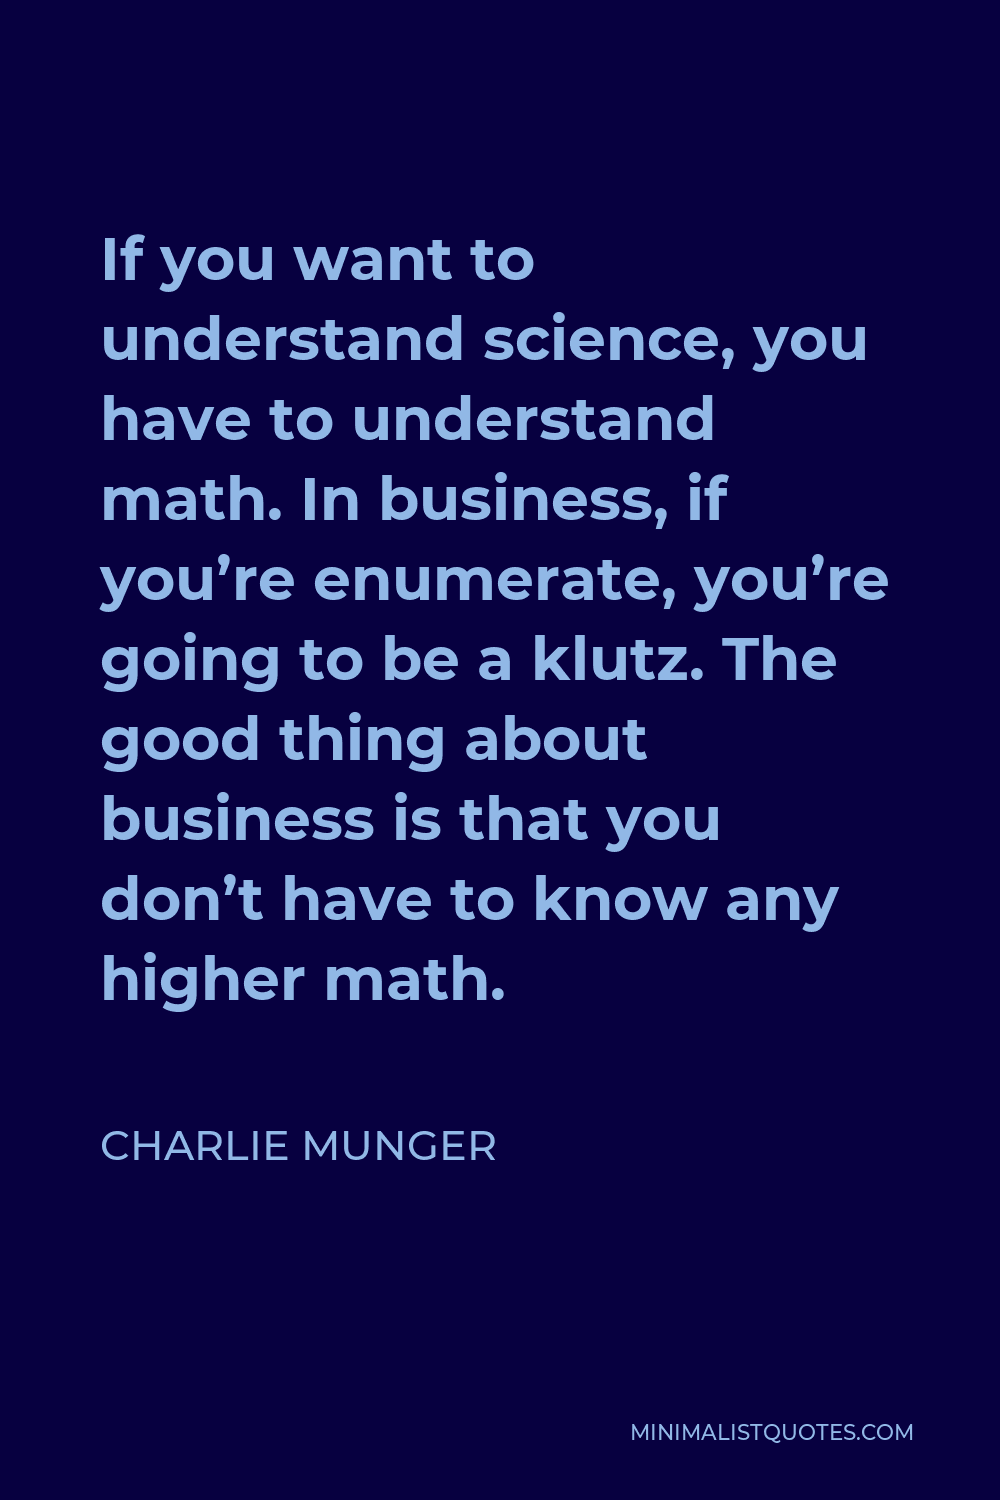 Charlie Munger Quote - If you want to understand science, you have to understand math. In business, if you’re enumerate, you’re going to be a klutz. The good thing about business is that you don’t have to know any higher math.